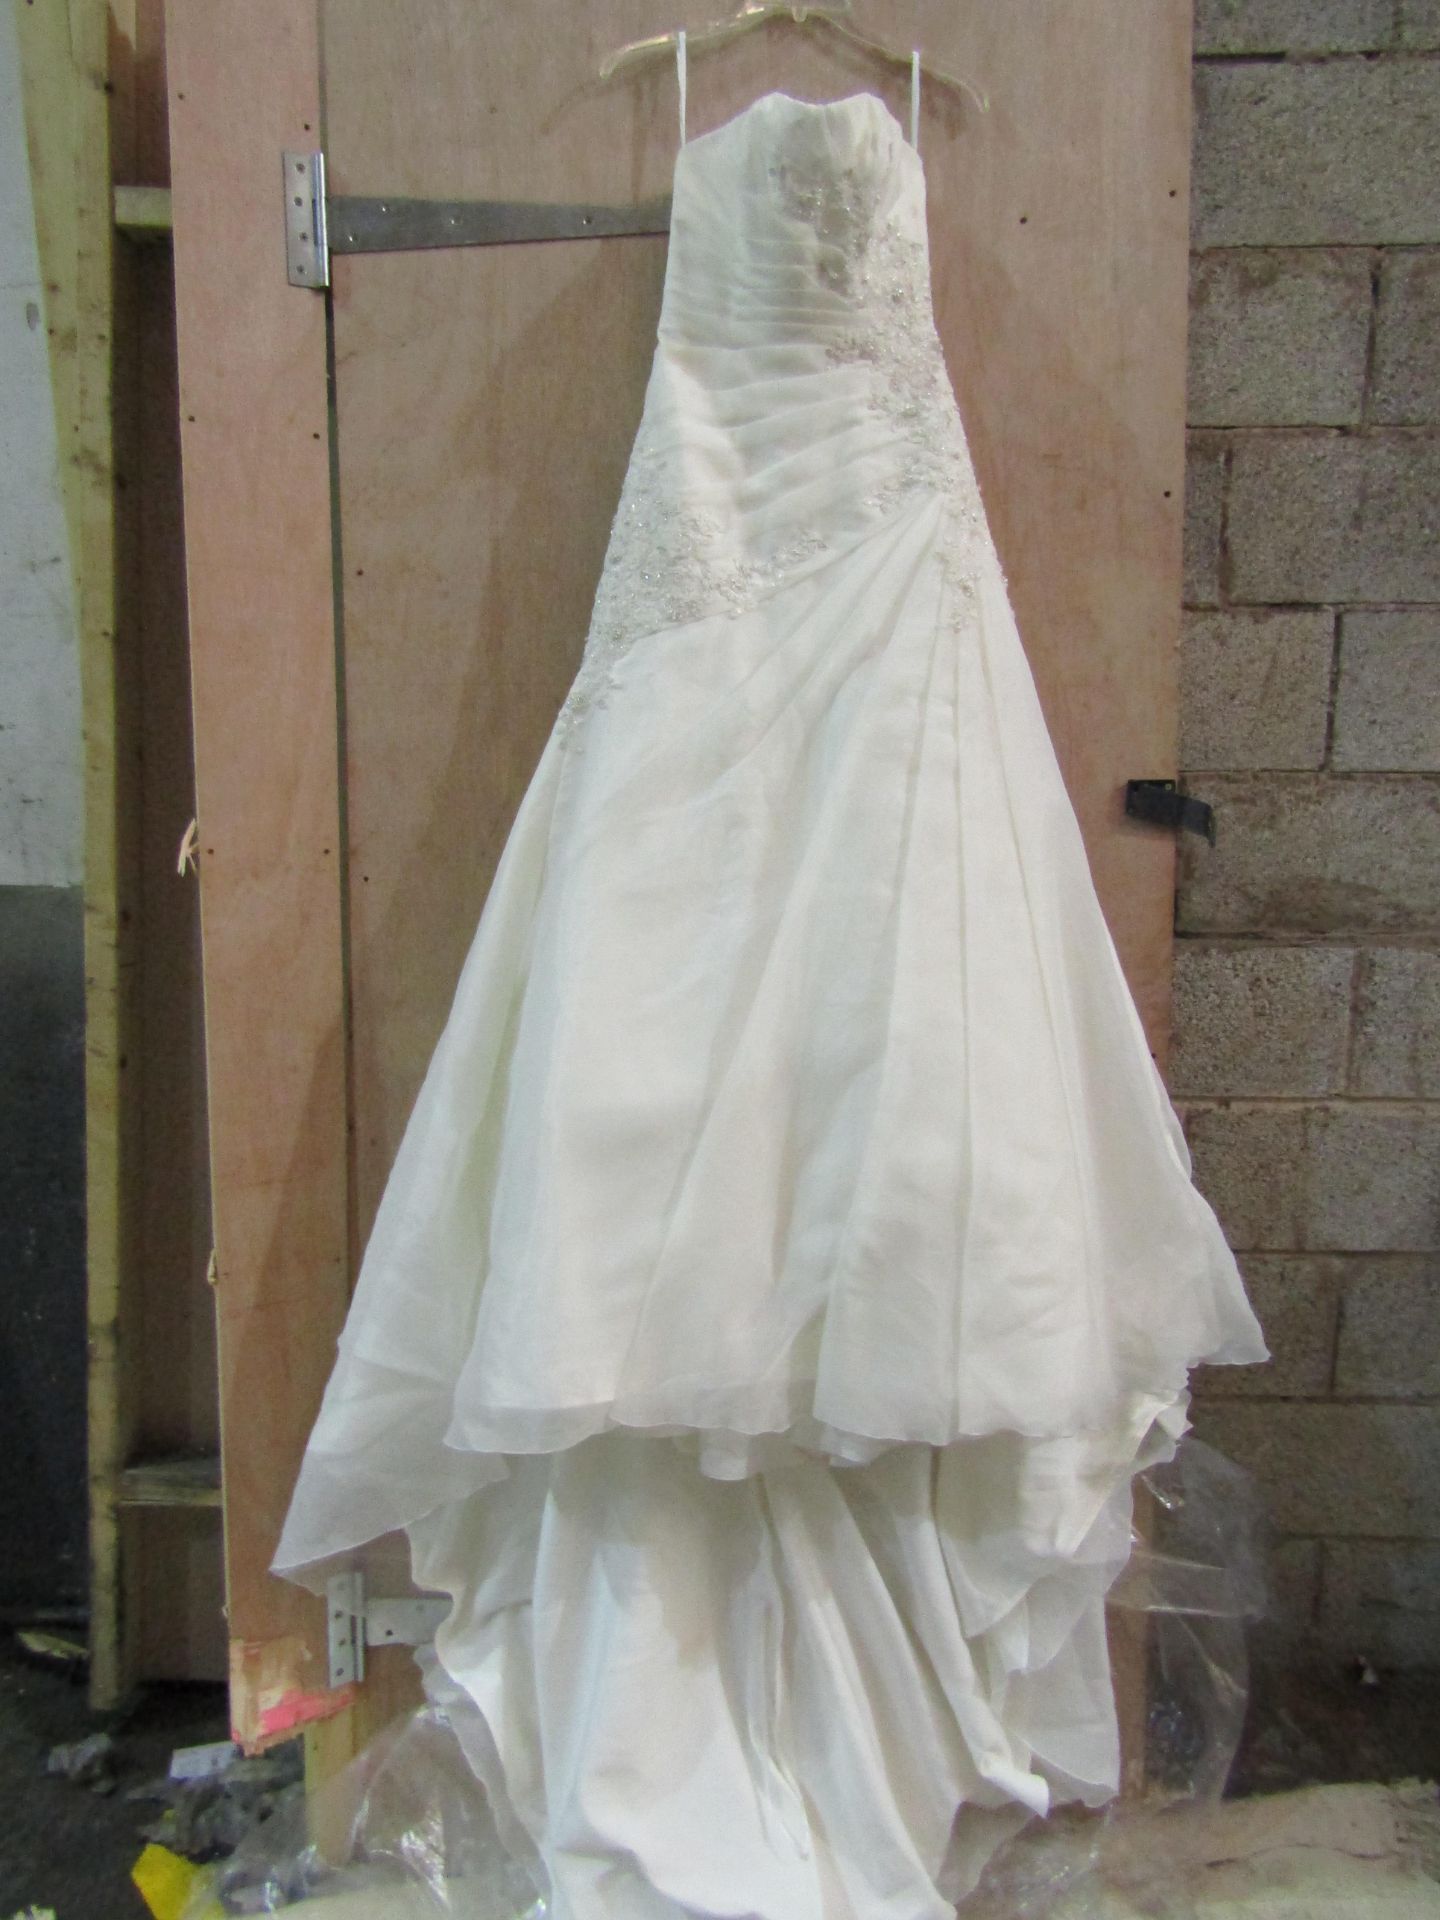 Approx 500 pieces of wedding shop stock to include wedding dresses, mother of the bride, dresses, - Image 19 of 43